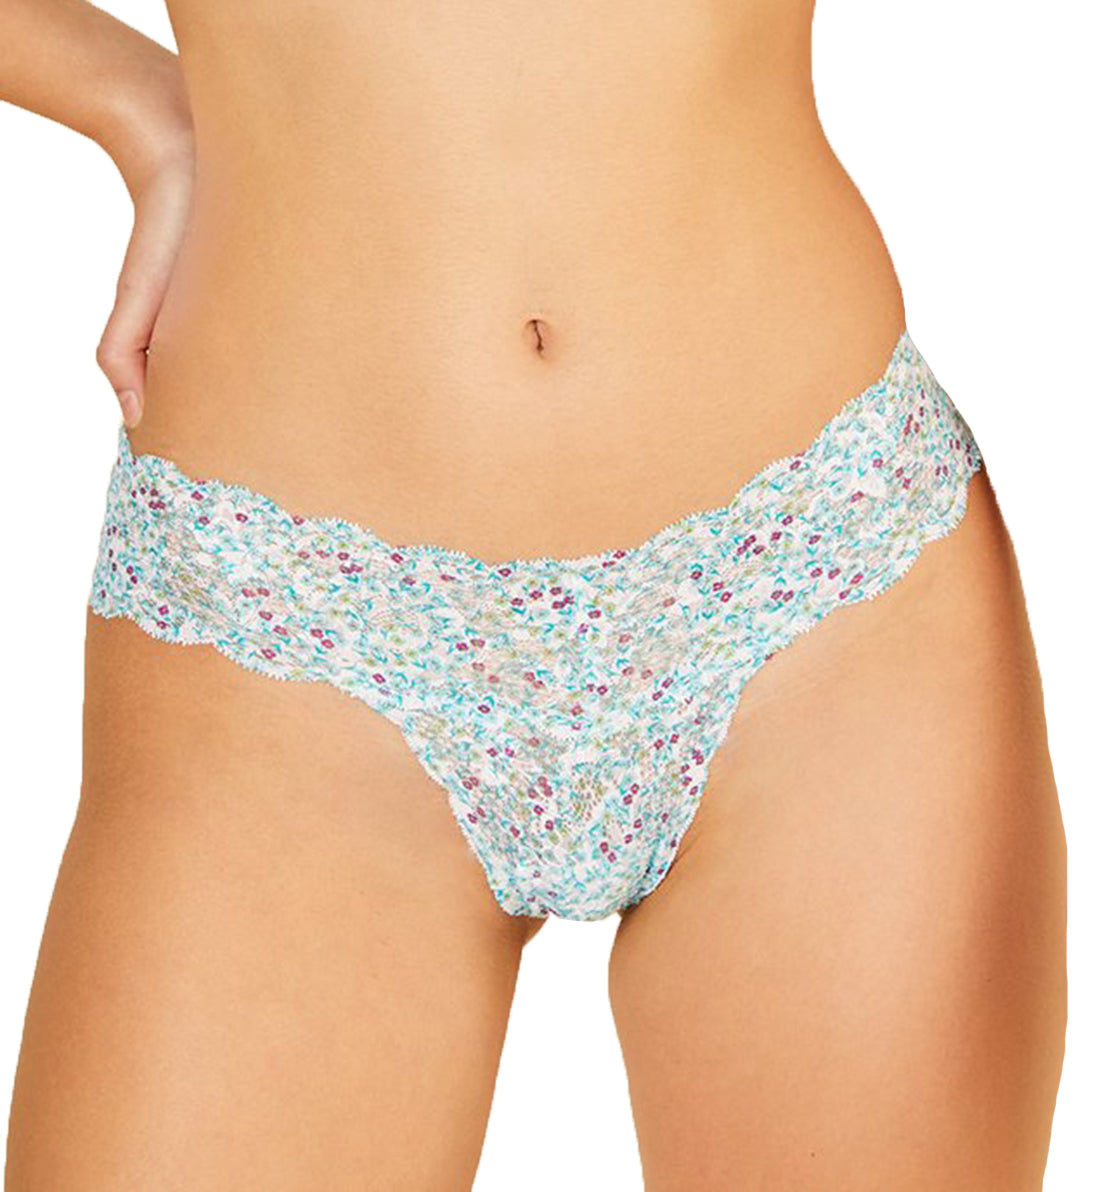 Cosabella Never Say Never Printed Cutie Thong (NEVEP0321),Floral Blu Venezia - Floral Blu Venezia,One Size